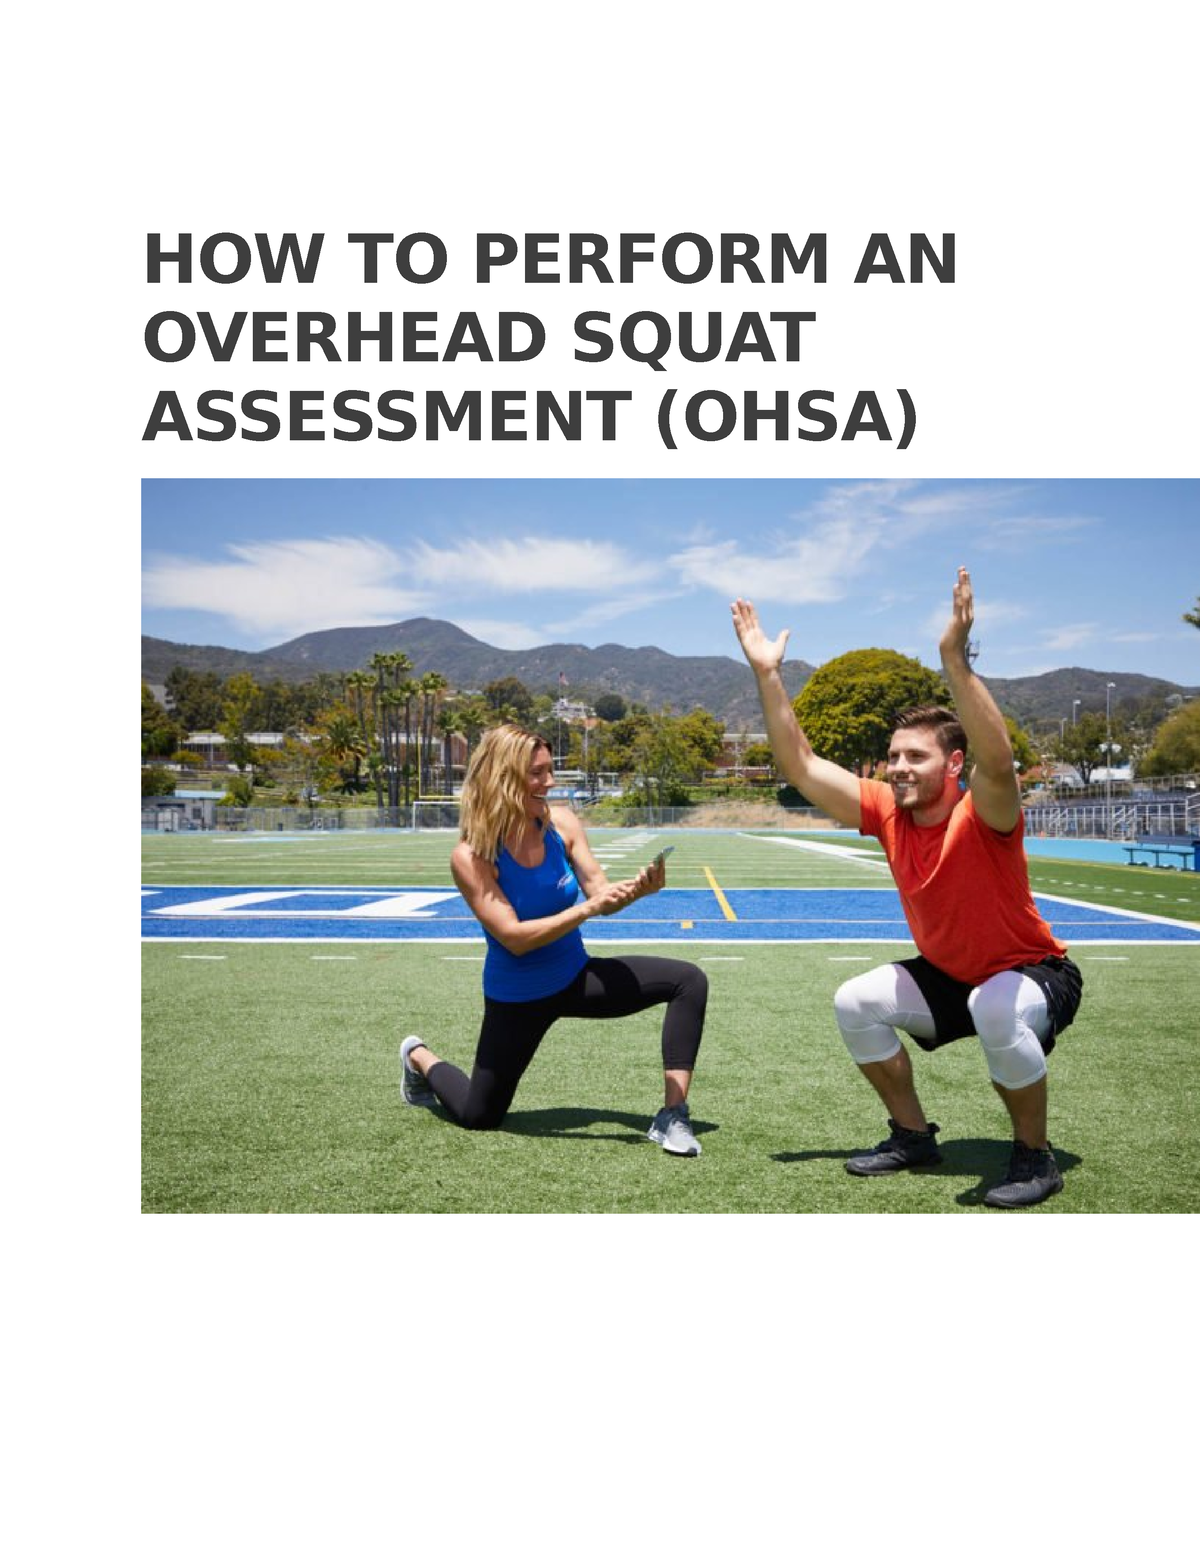 How To Perform An Overhead Squat Assessment How To Perform An Overhead Squat Assessment Ohsa